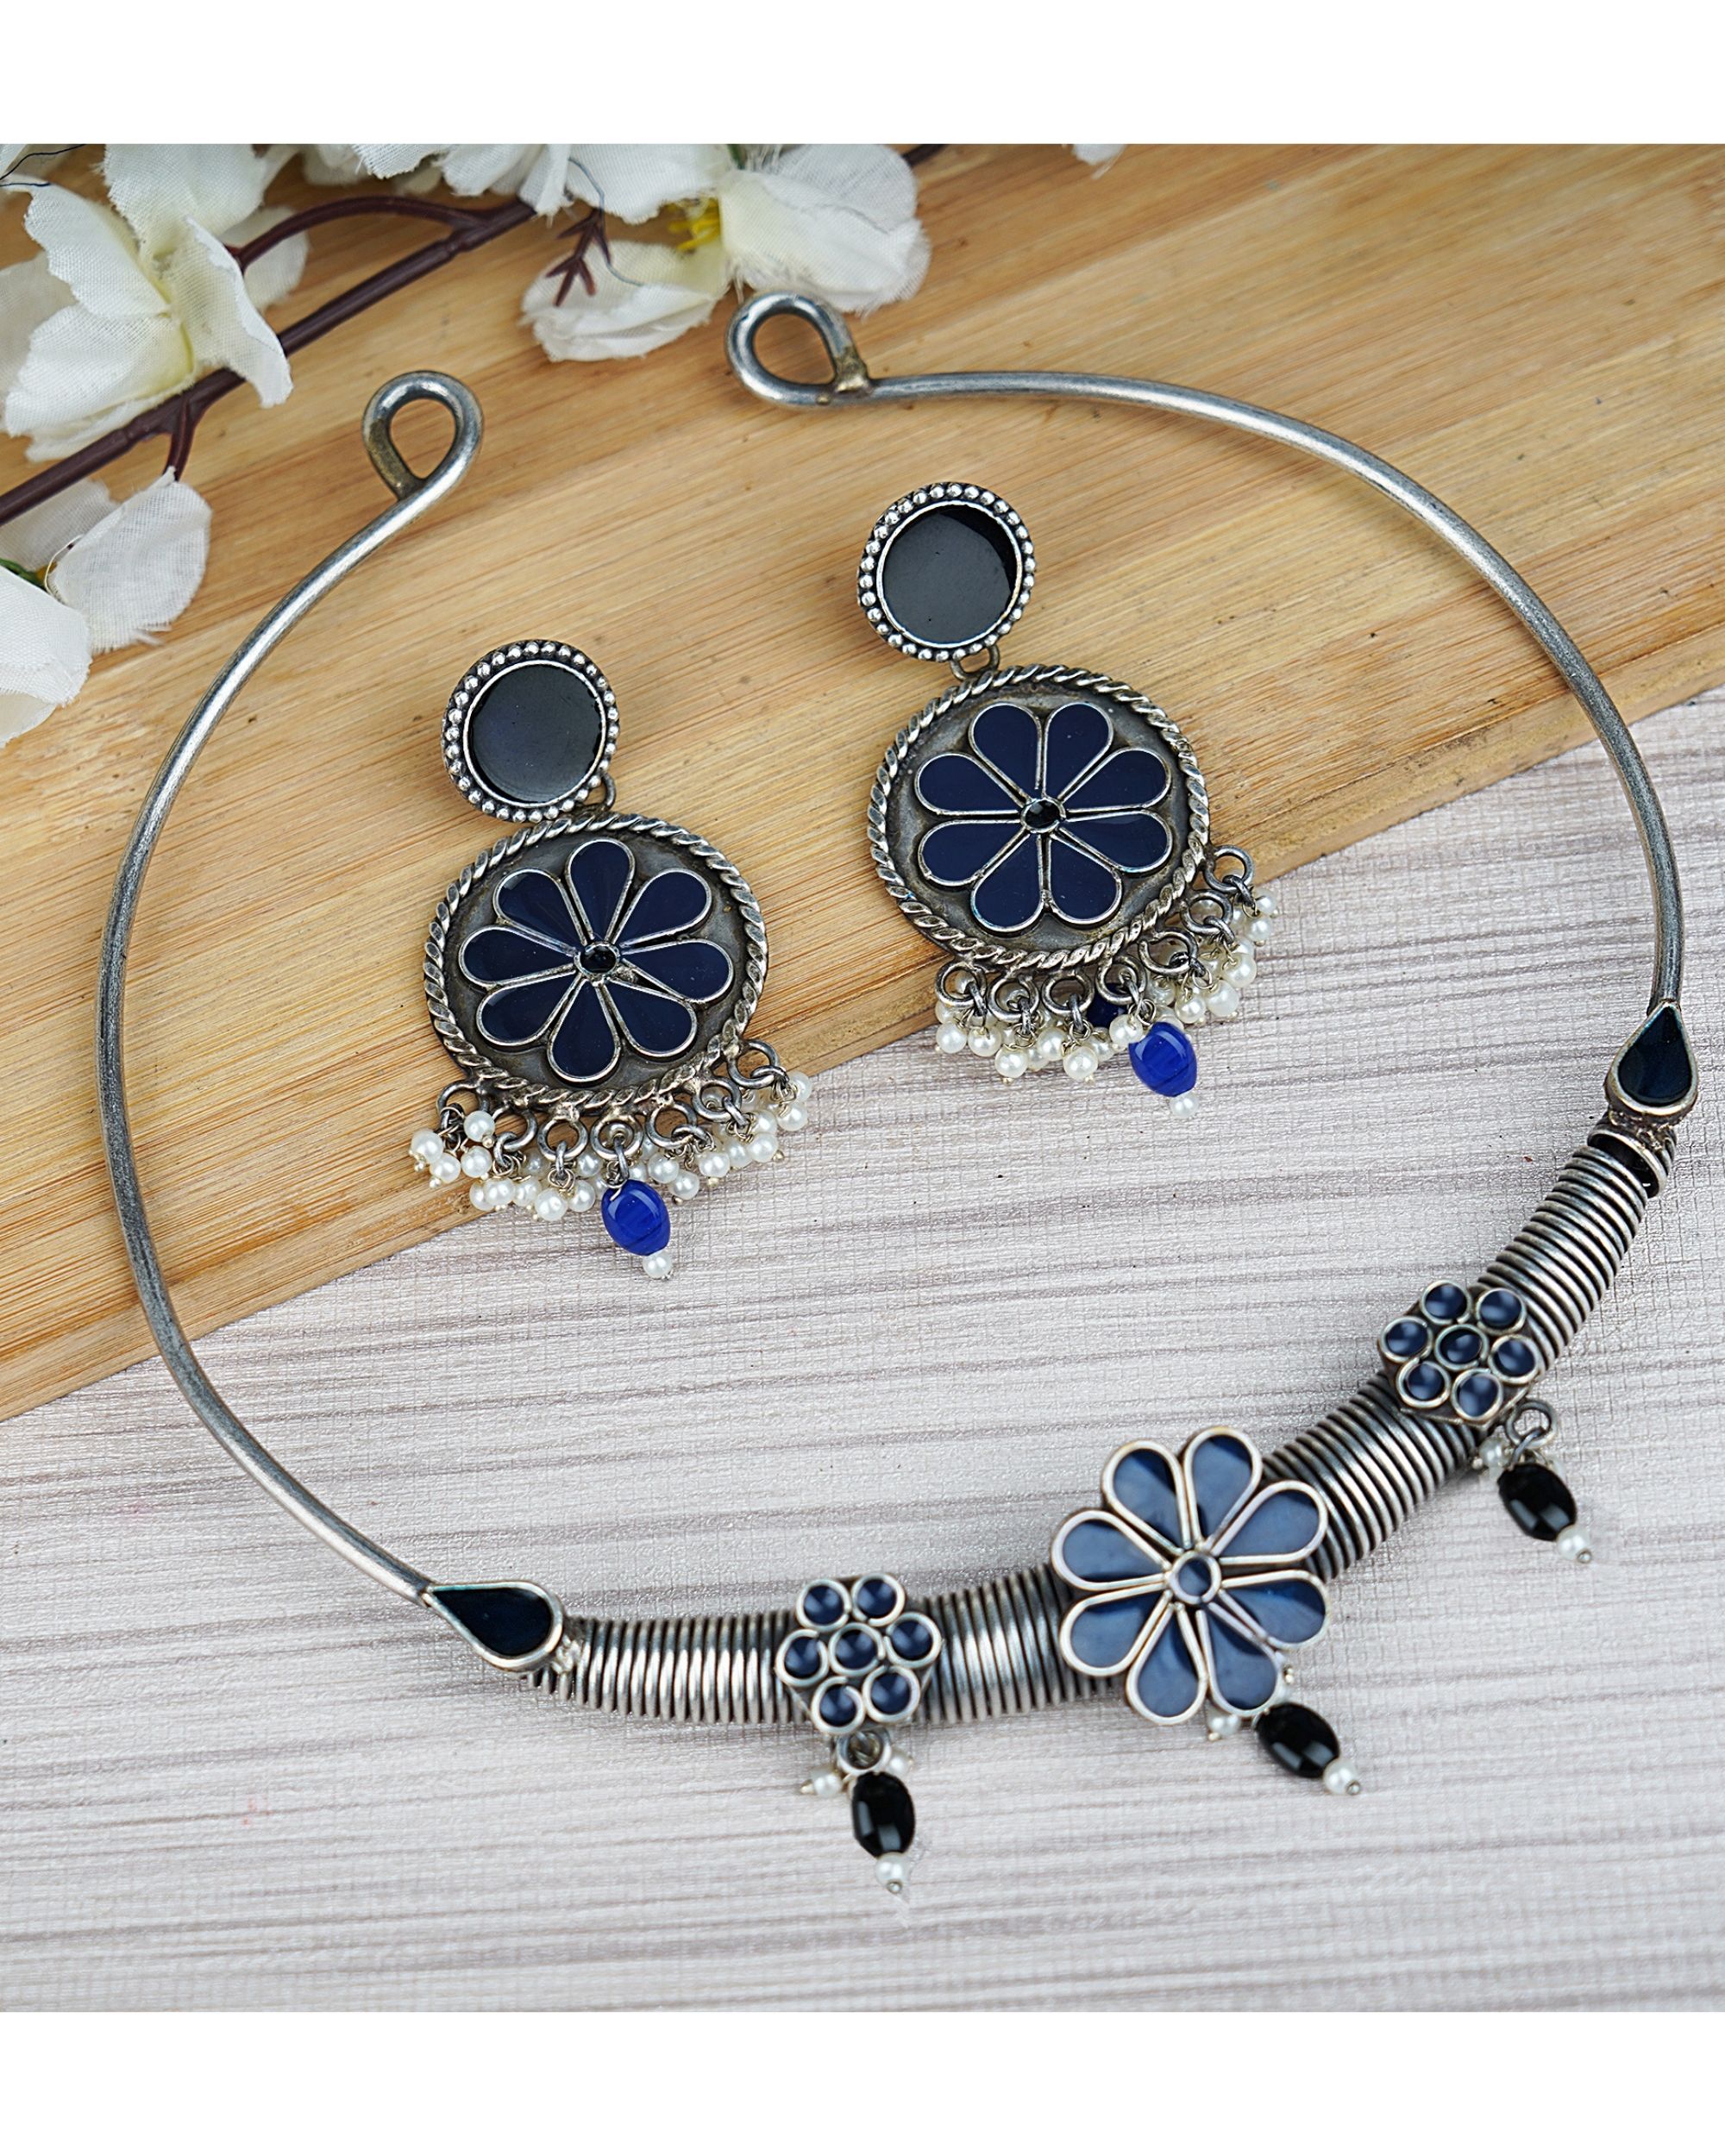 Blue floral drop neckpiece with earrings - set of two